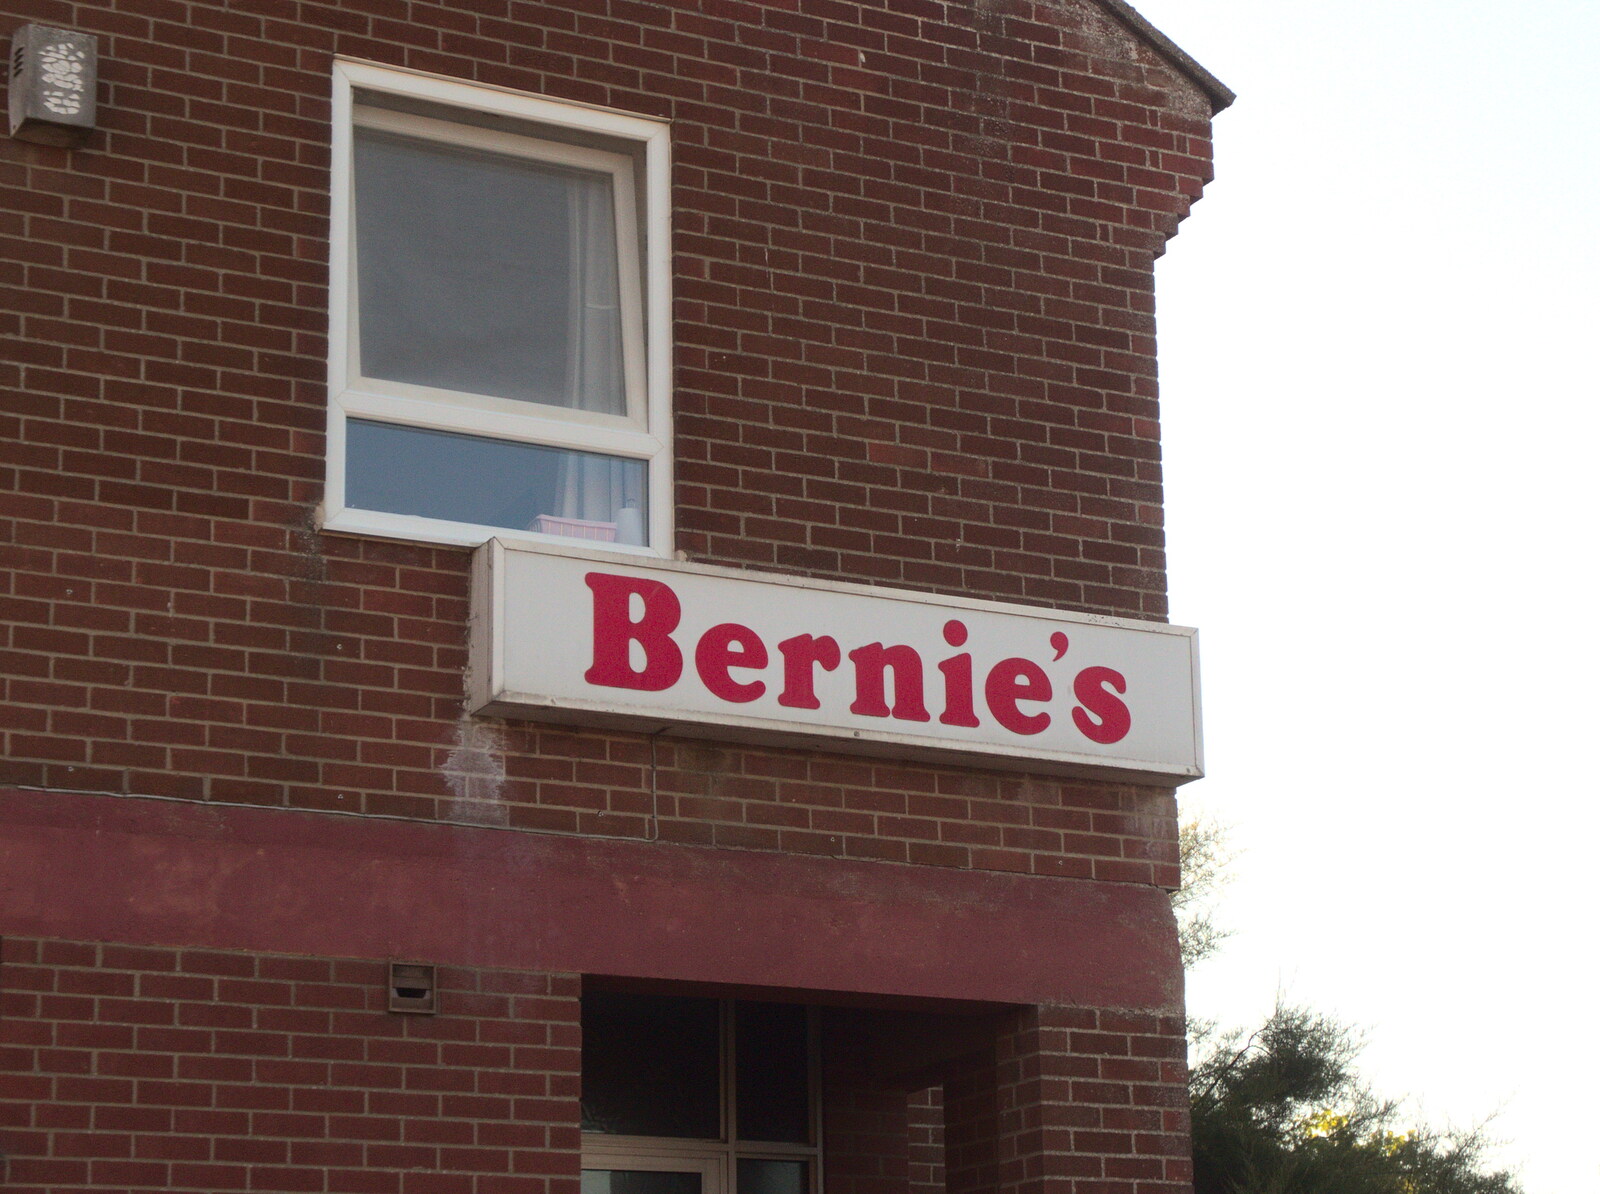 There's another ancient sign for Bernie's from Camping at Forest Park, Cromer, Norfolk - 12th August 2022